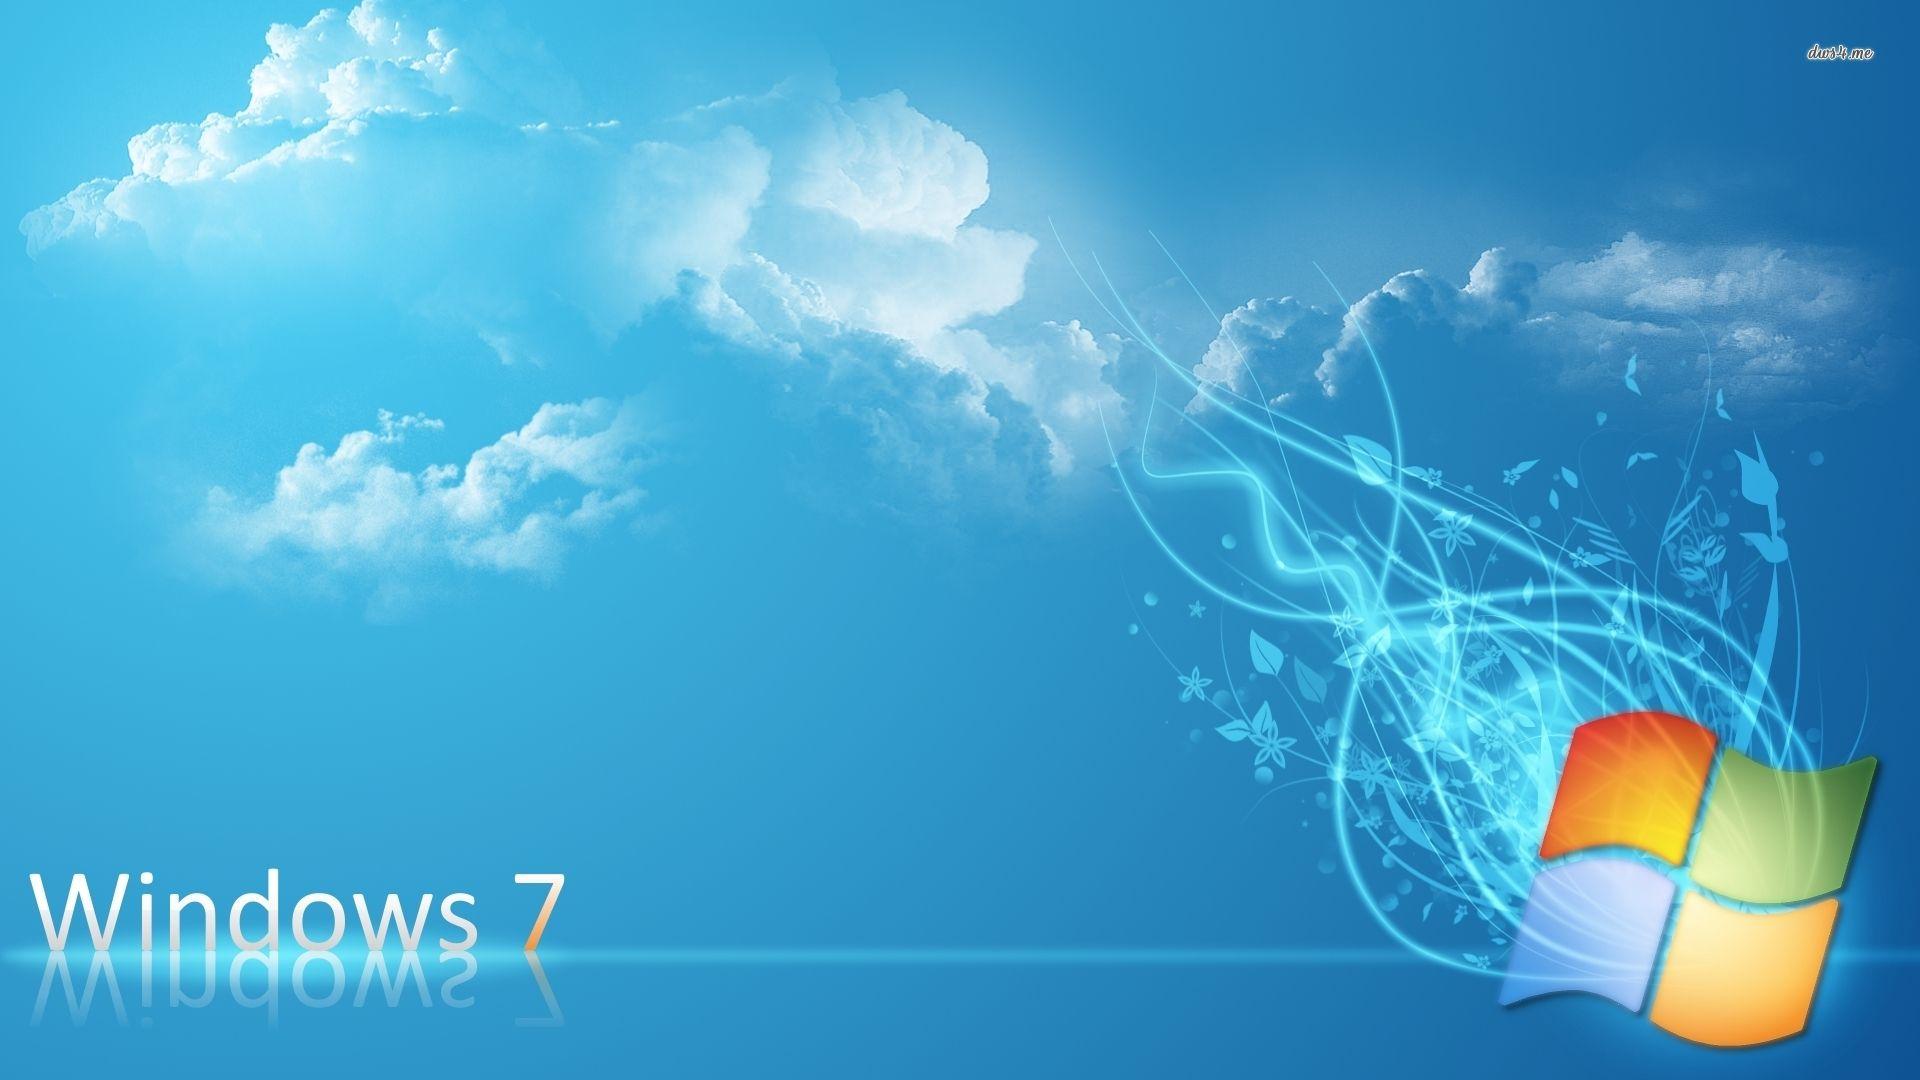 Windows 7 Pro Wallpapers - Top Free Windows 7 Pro Backgrounds ...